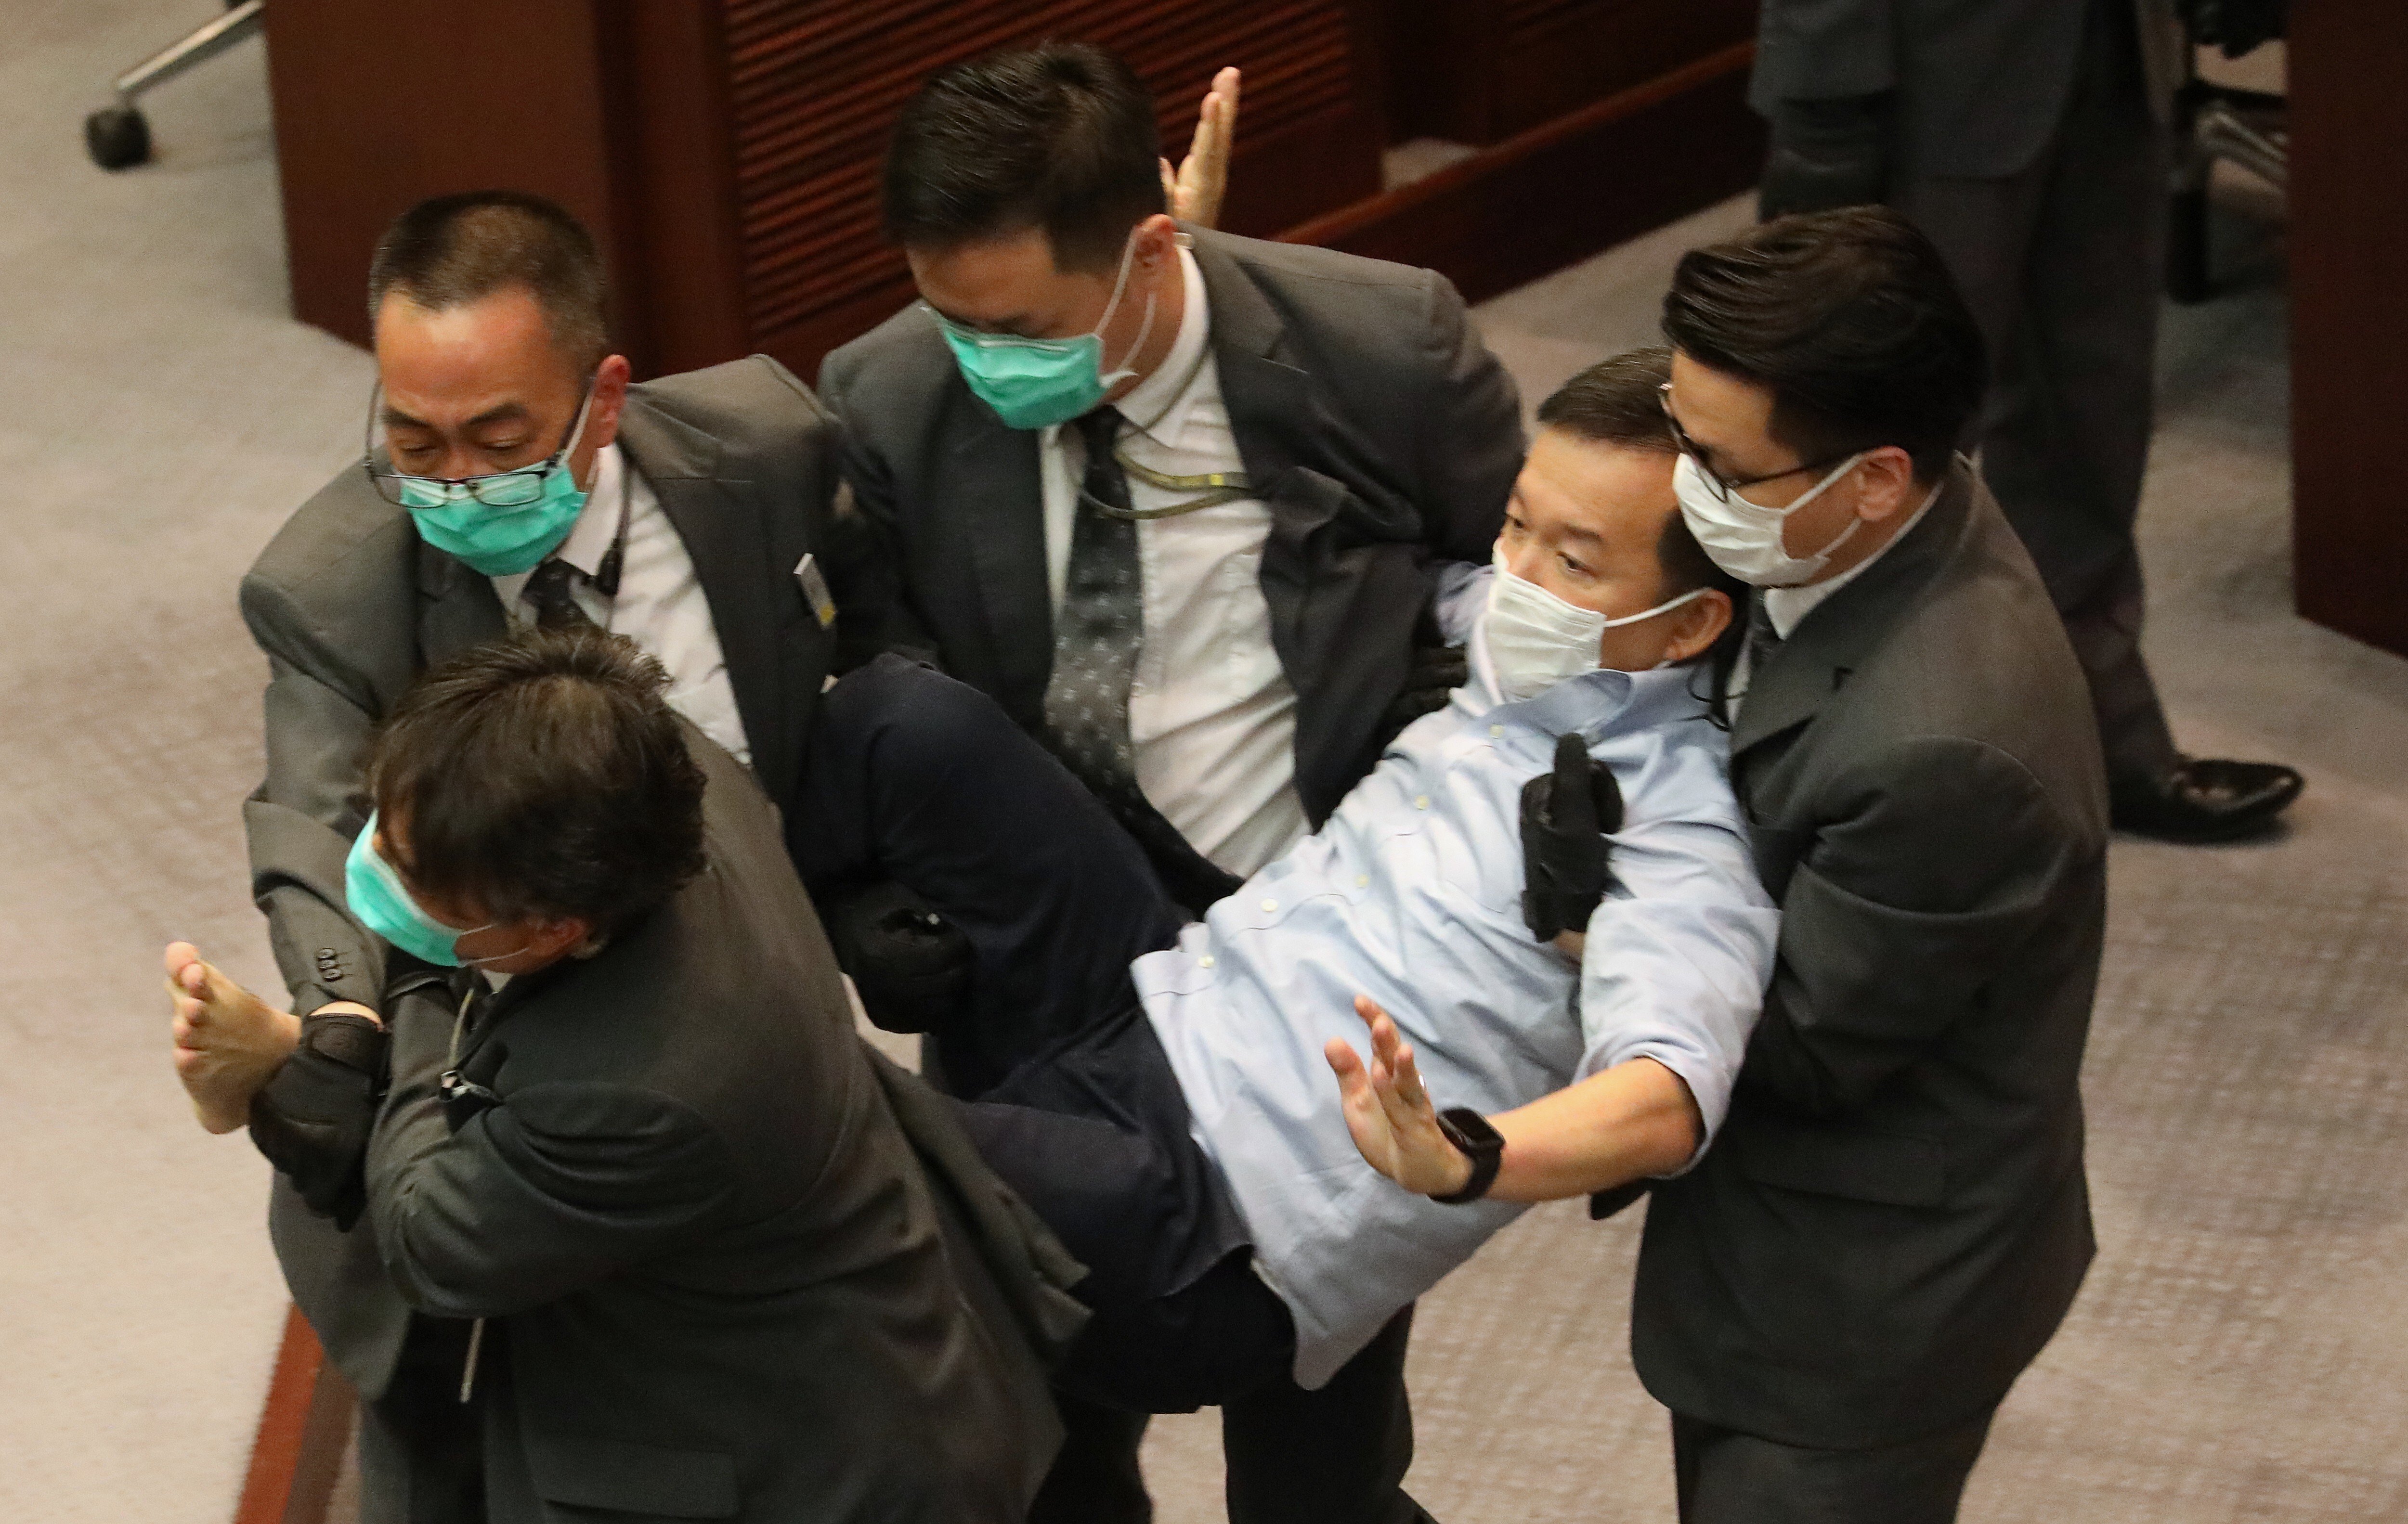 Pan-democrat lawmaker Raymond Chan, pictured being removed from Legco’s chamber, is among those to make allegations relating to Friday’s mayhem. Photo: Dickson Lee